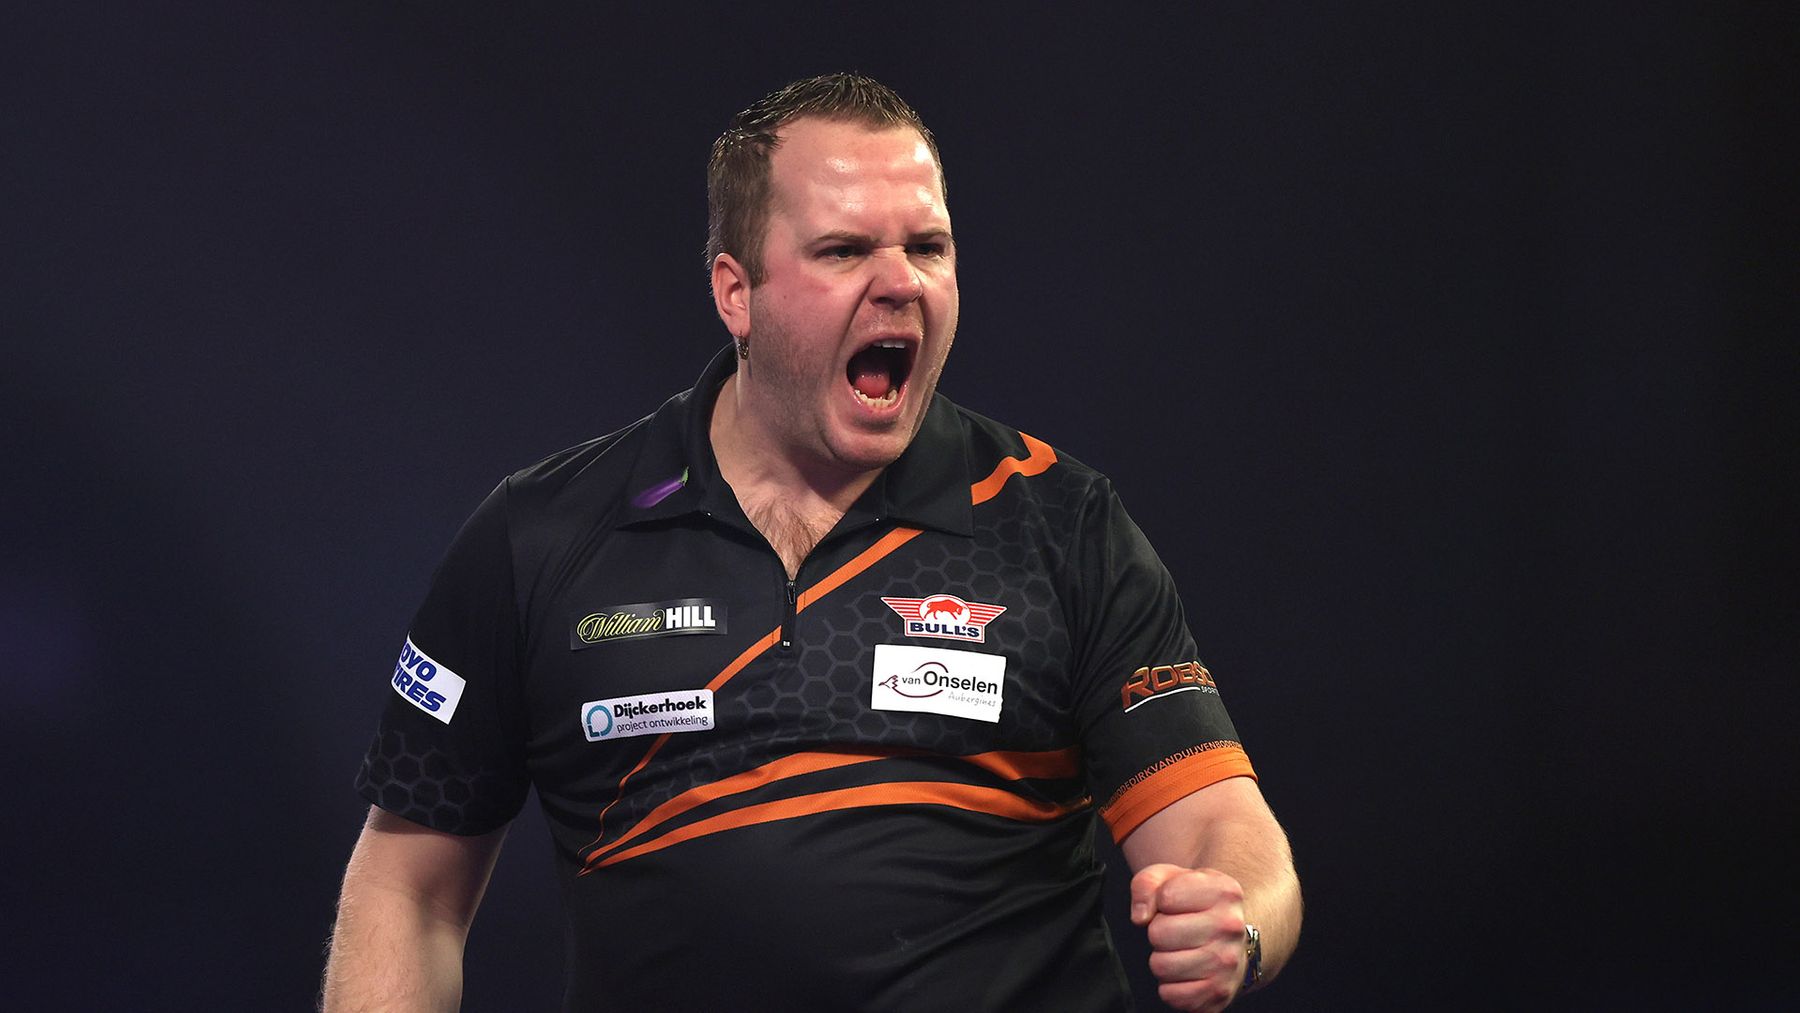 Darts results: Dirk van Duijvenbode wins his first PDC ranking title at